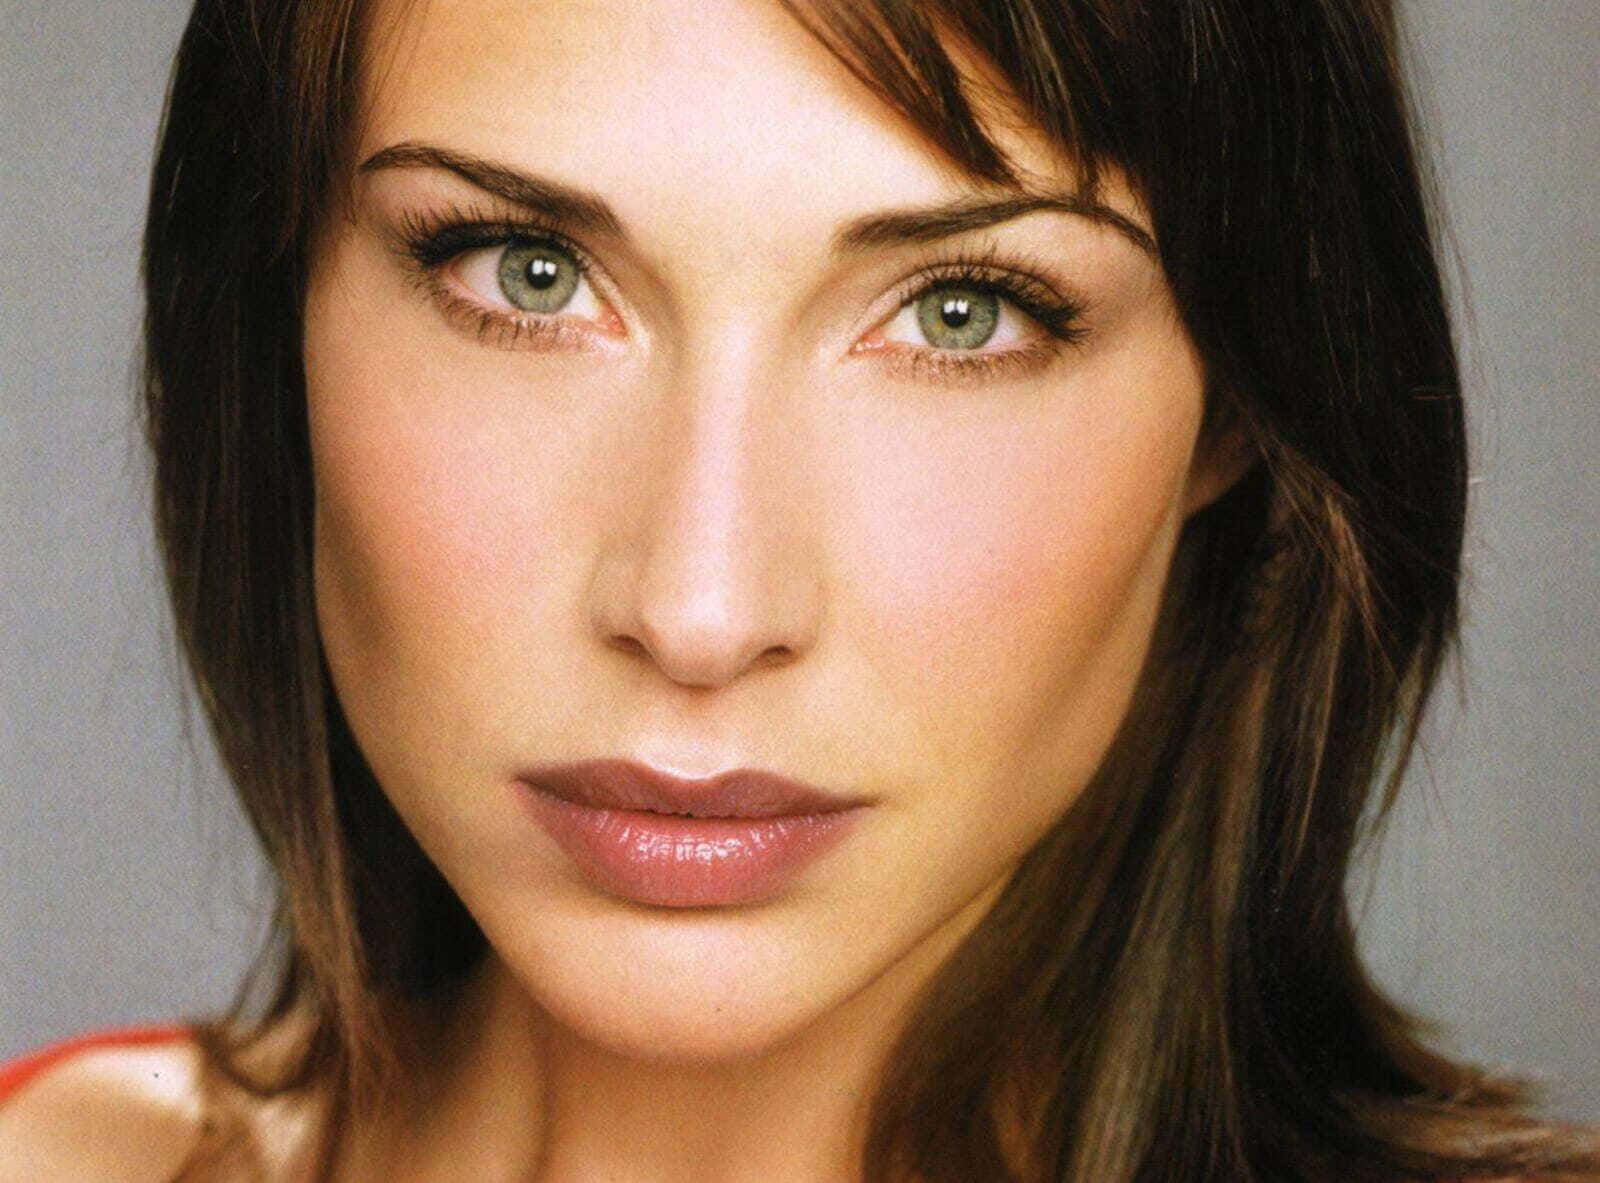 Claire Forlani posing in a black dress Wallpaper